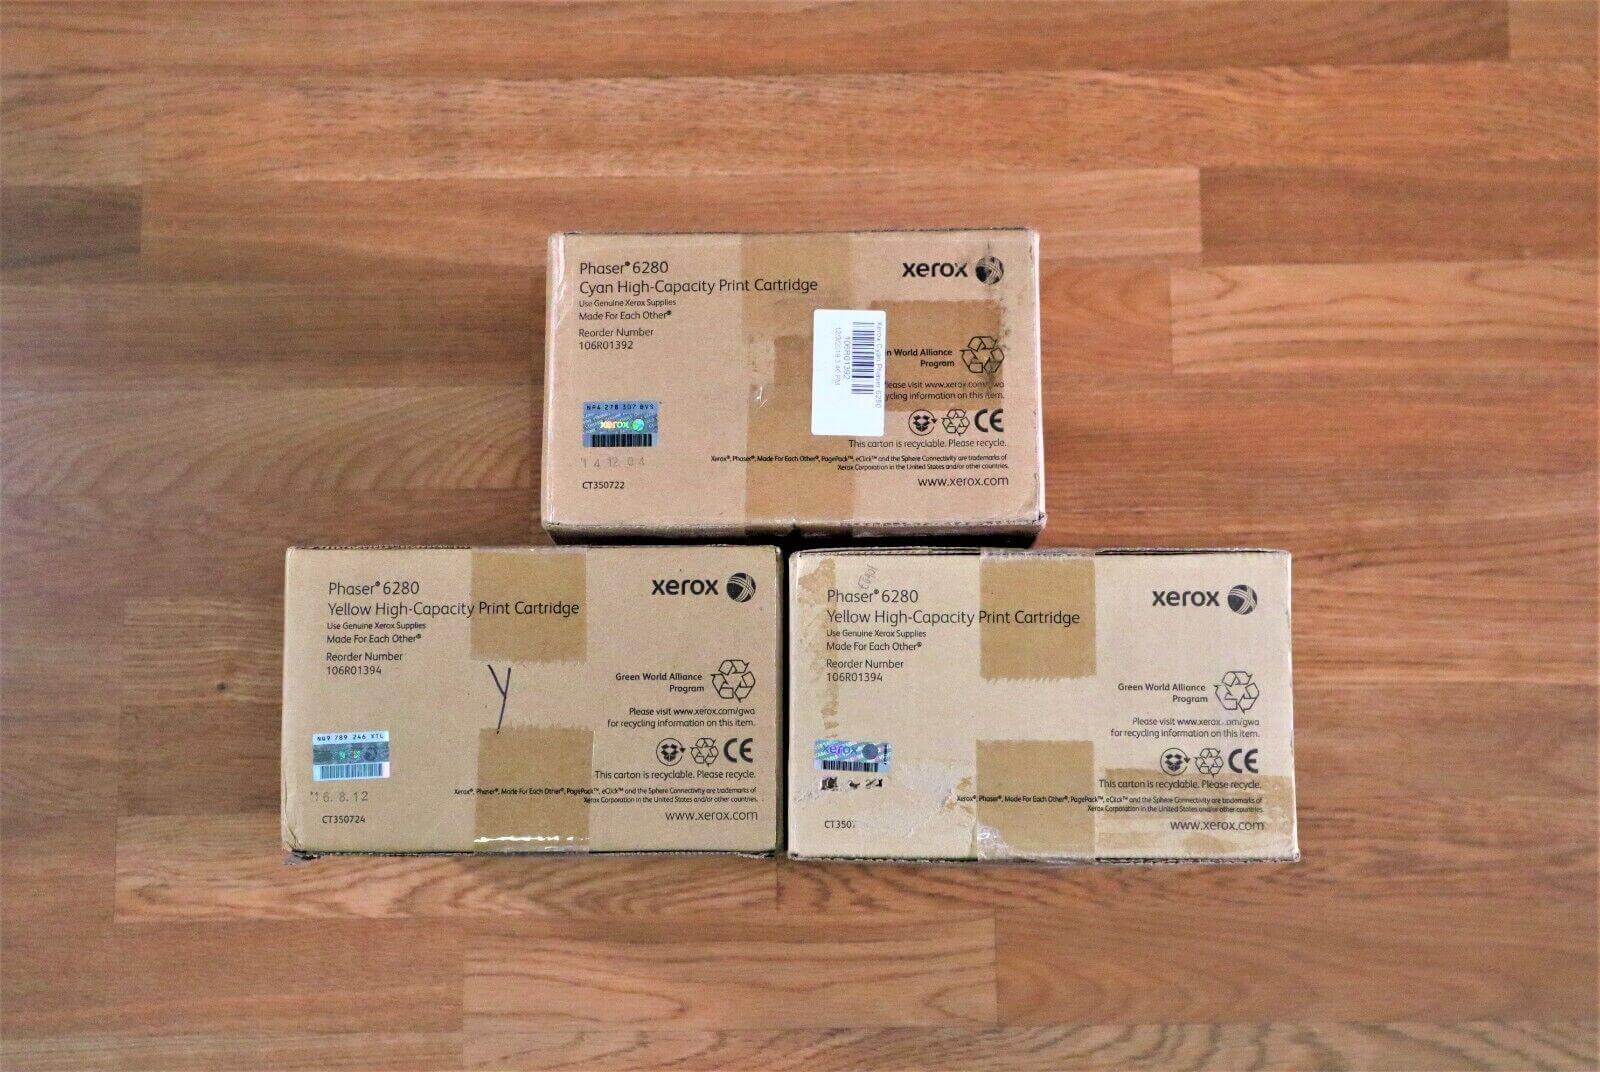 Lot Of 3 Xerox Phaser6280 Cyan/Yellow Toner 106R01392 106R01394 For 6280DN,6280N - copier-clearance-center